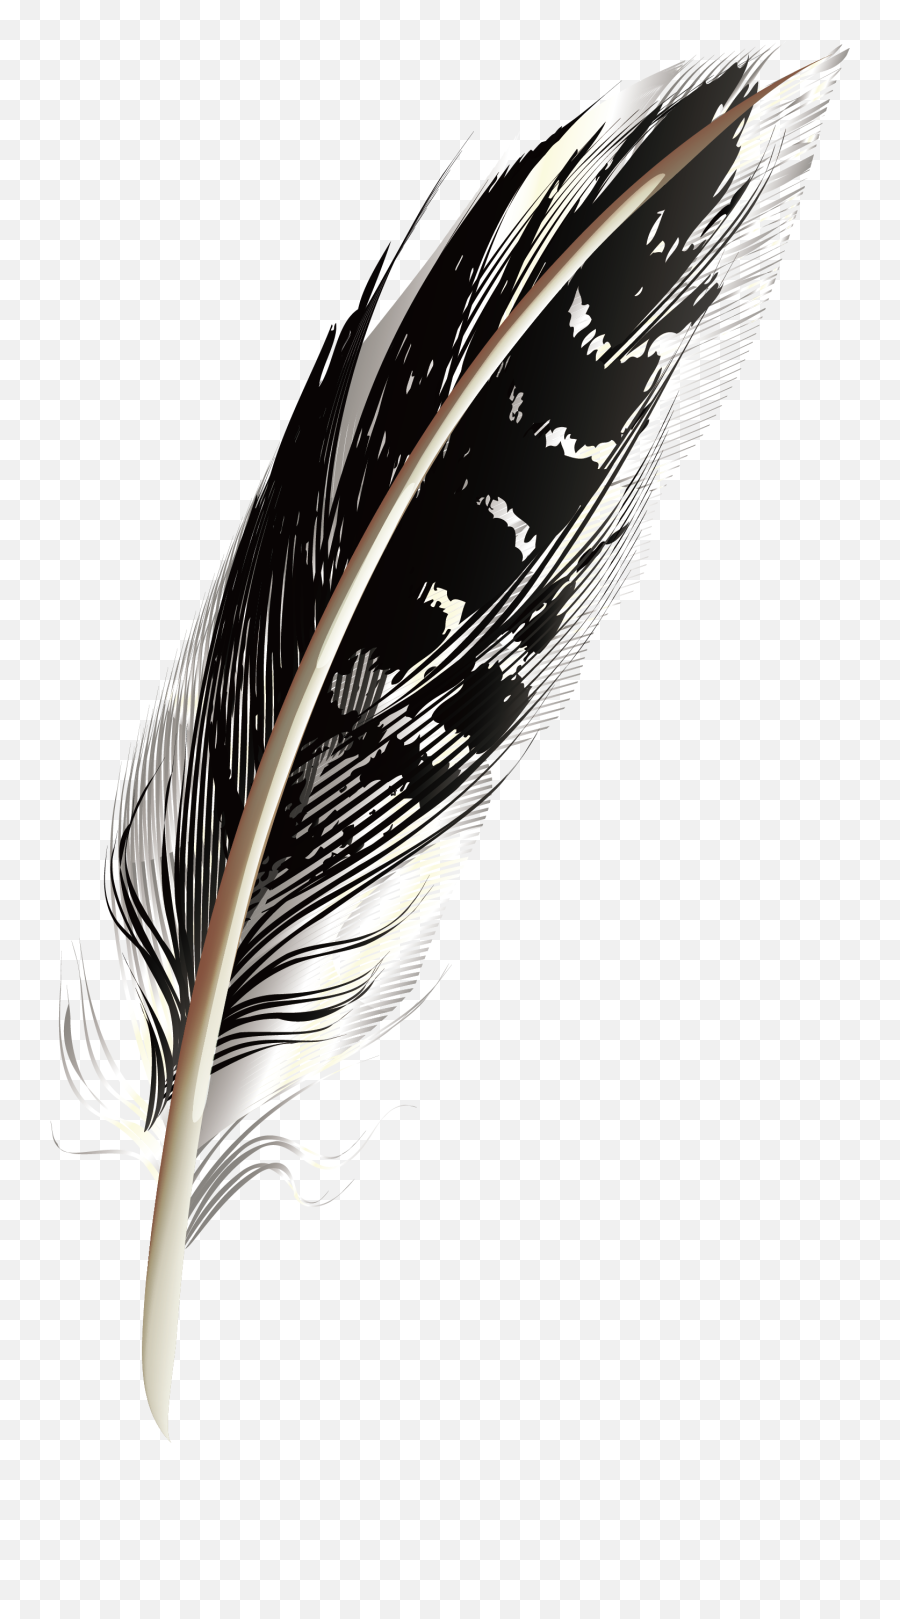 Feather - A Black Pattern Feathers Png Download 14882612 Black Feather Wings With Transparent Background Emoji,Feather Clipart Black And White